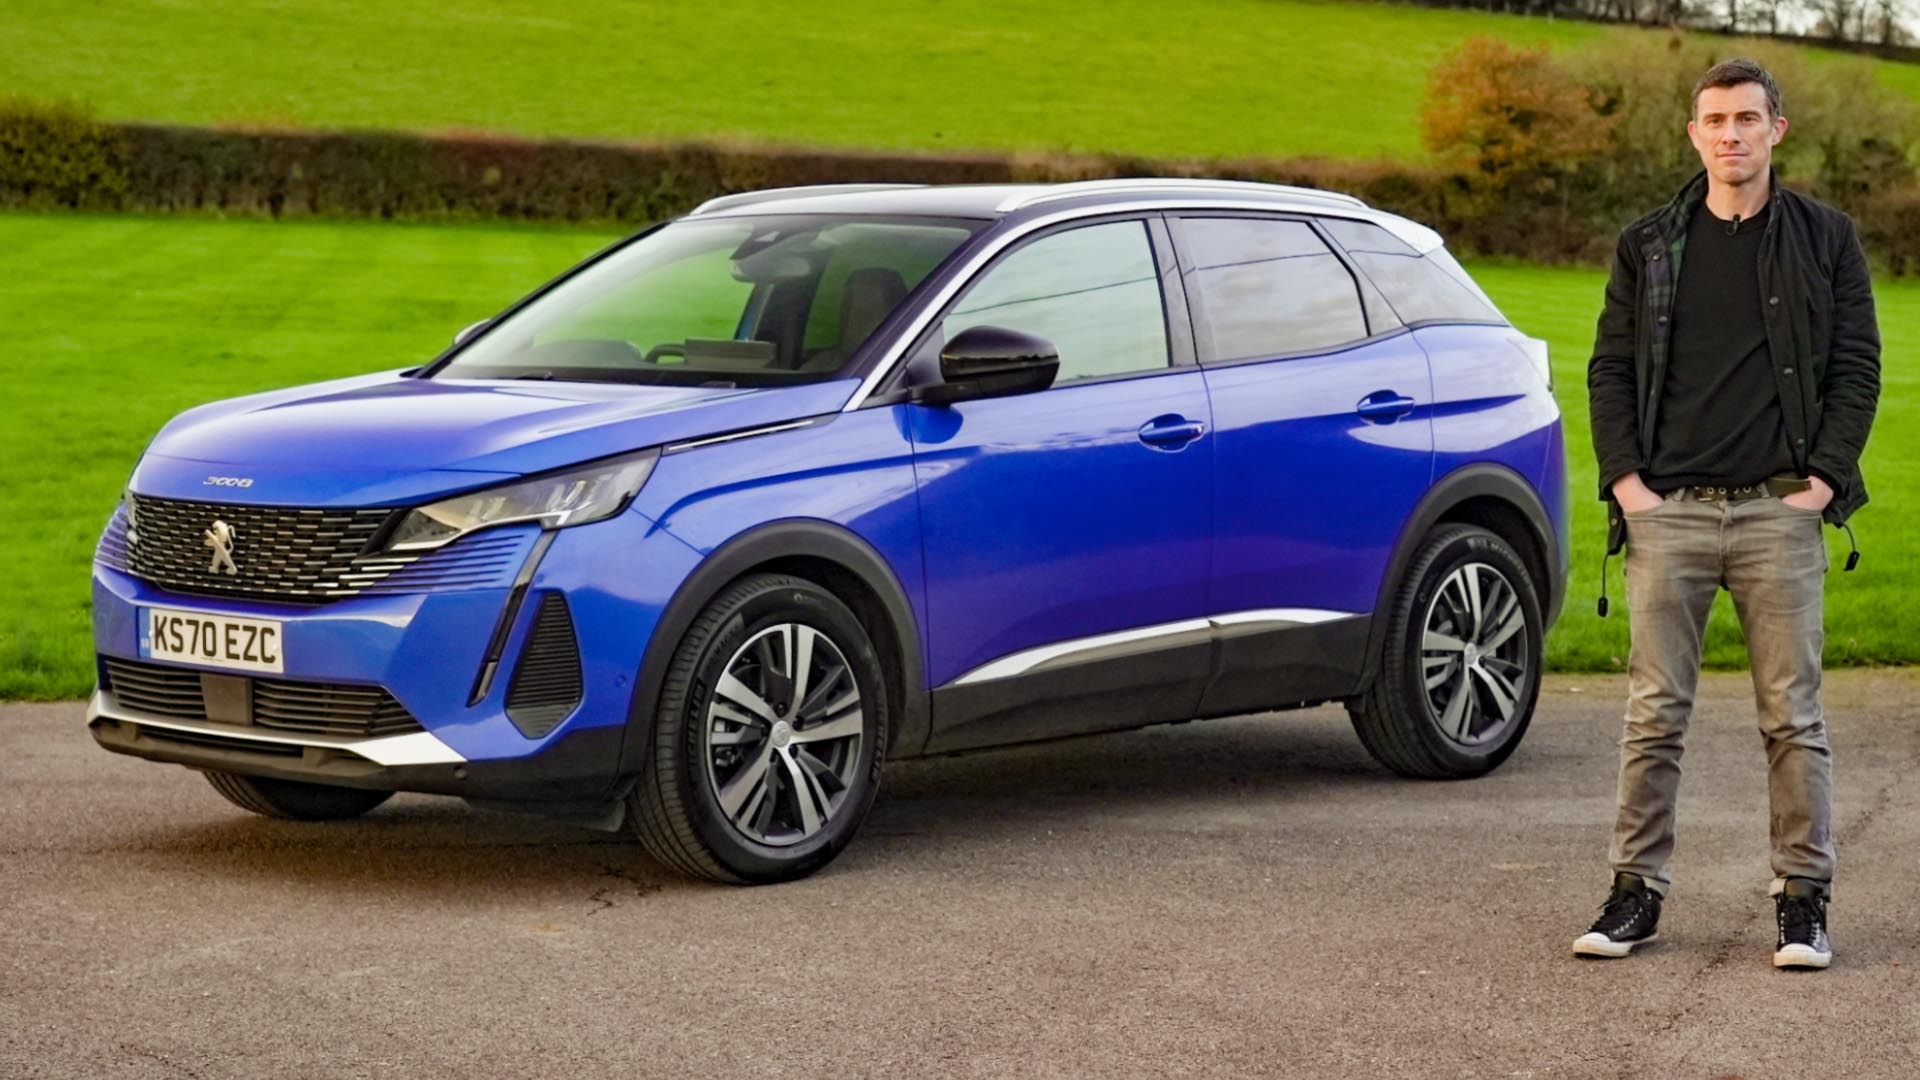 TESTED: The Peugeot 3008 is a refreshingly sophisticated option